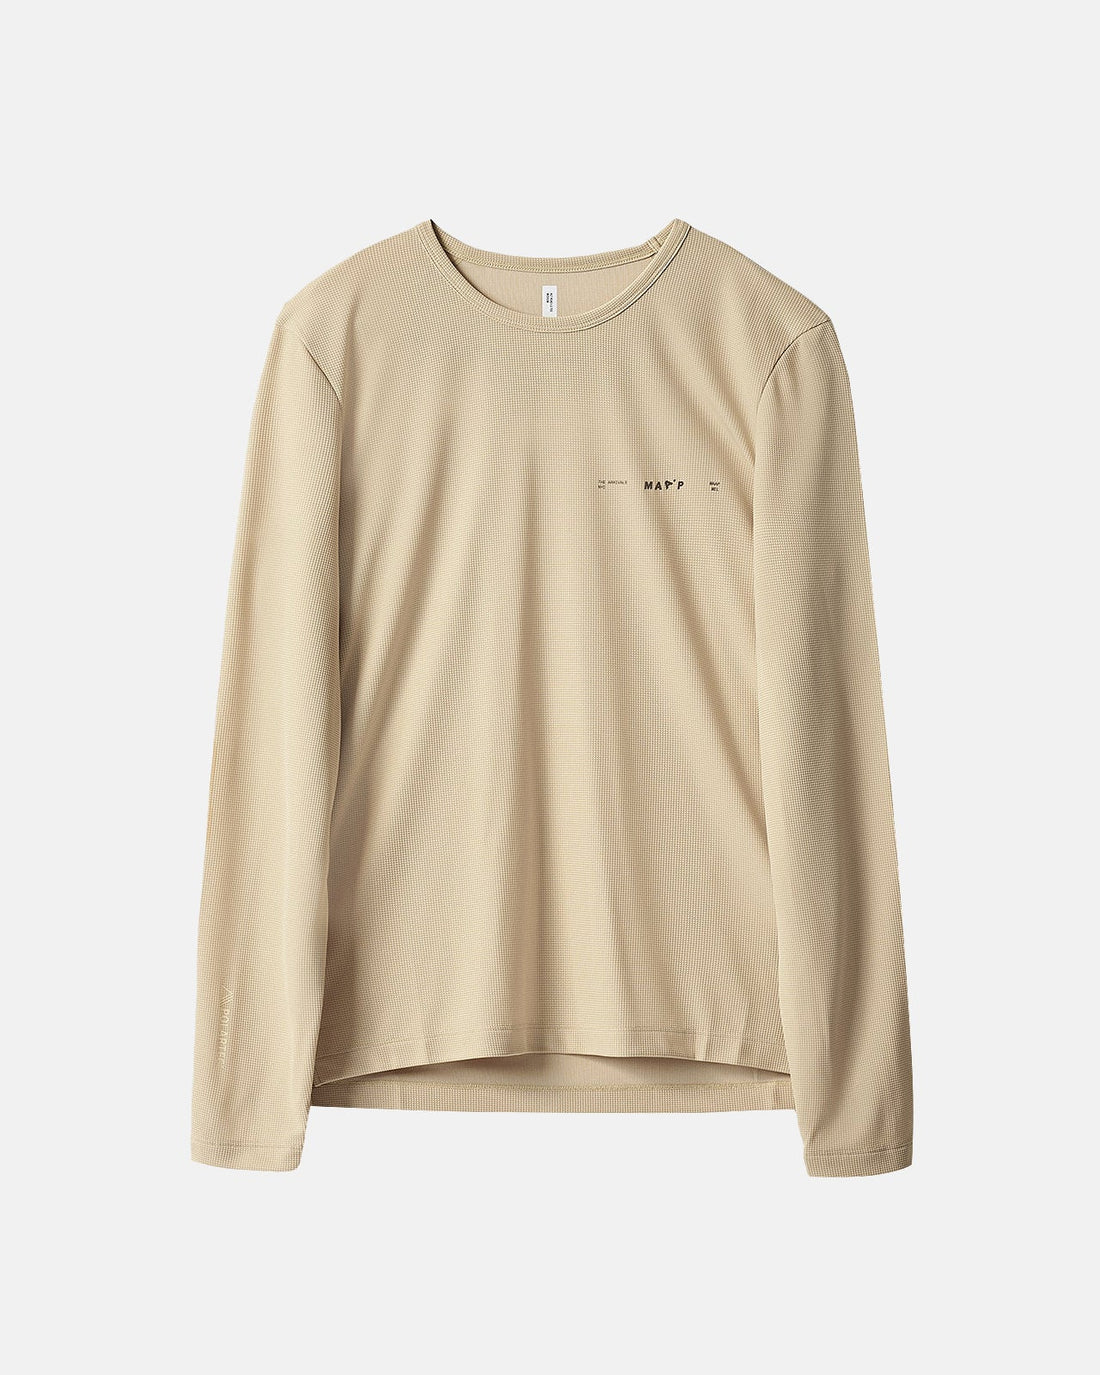 x The Arrivals LS Tee - Sand - MAAP